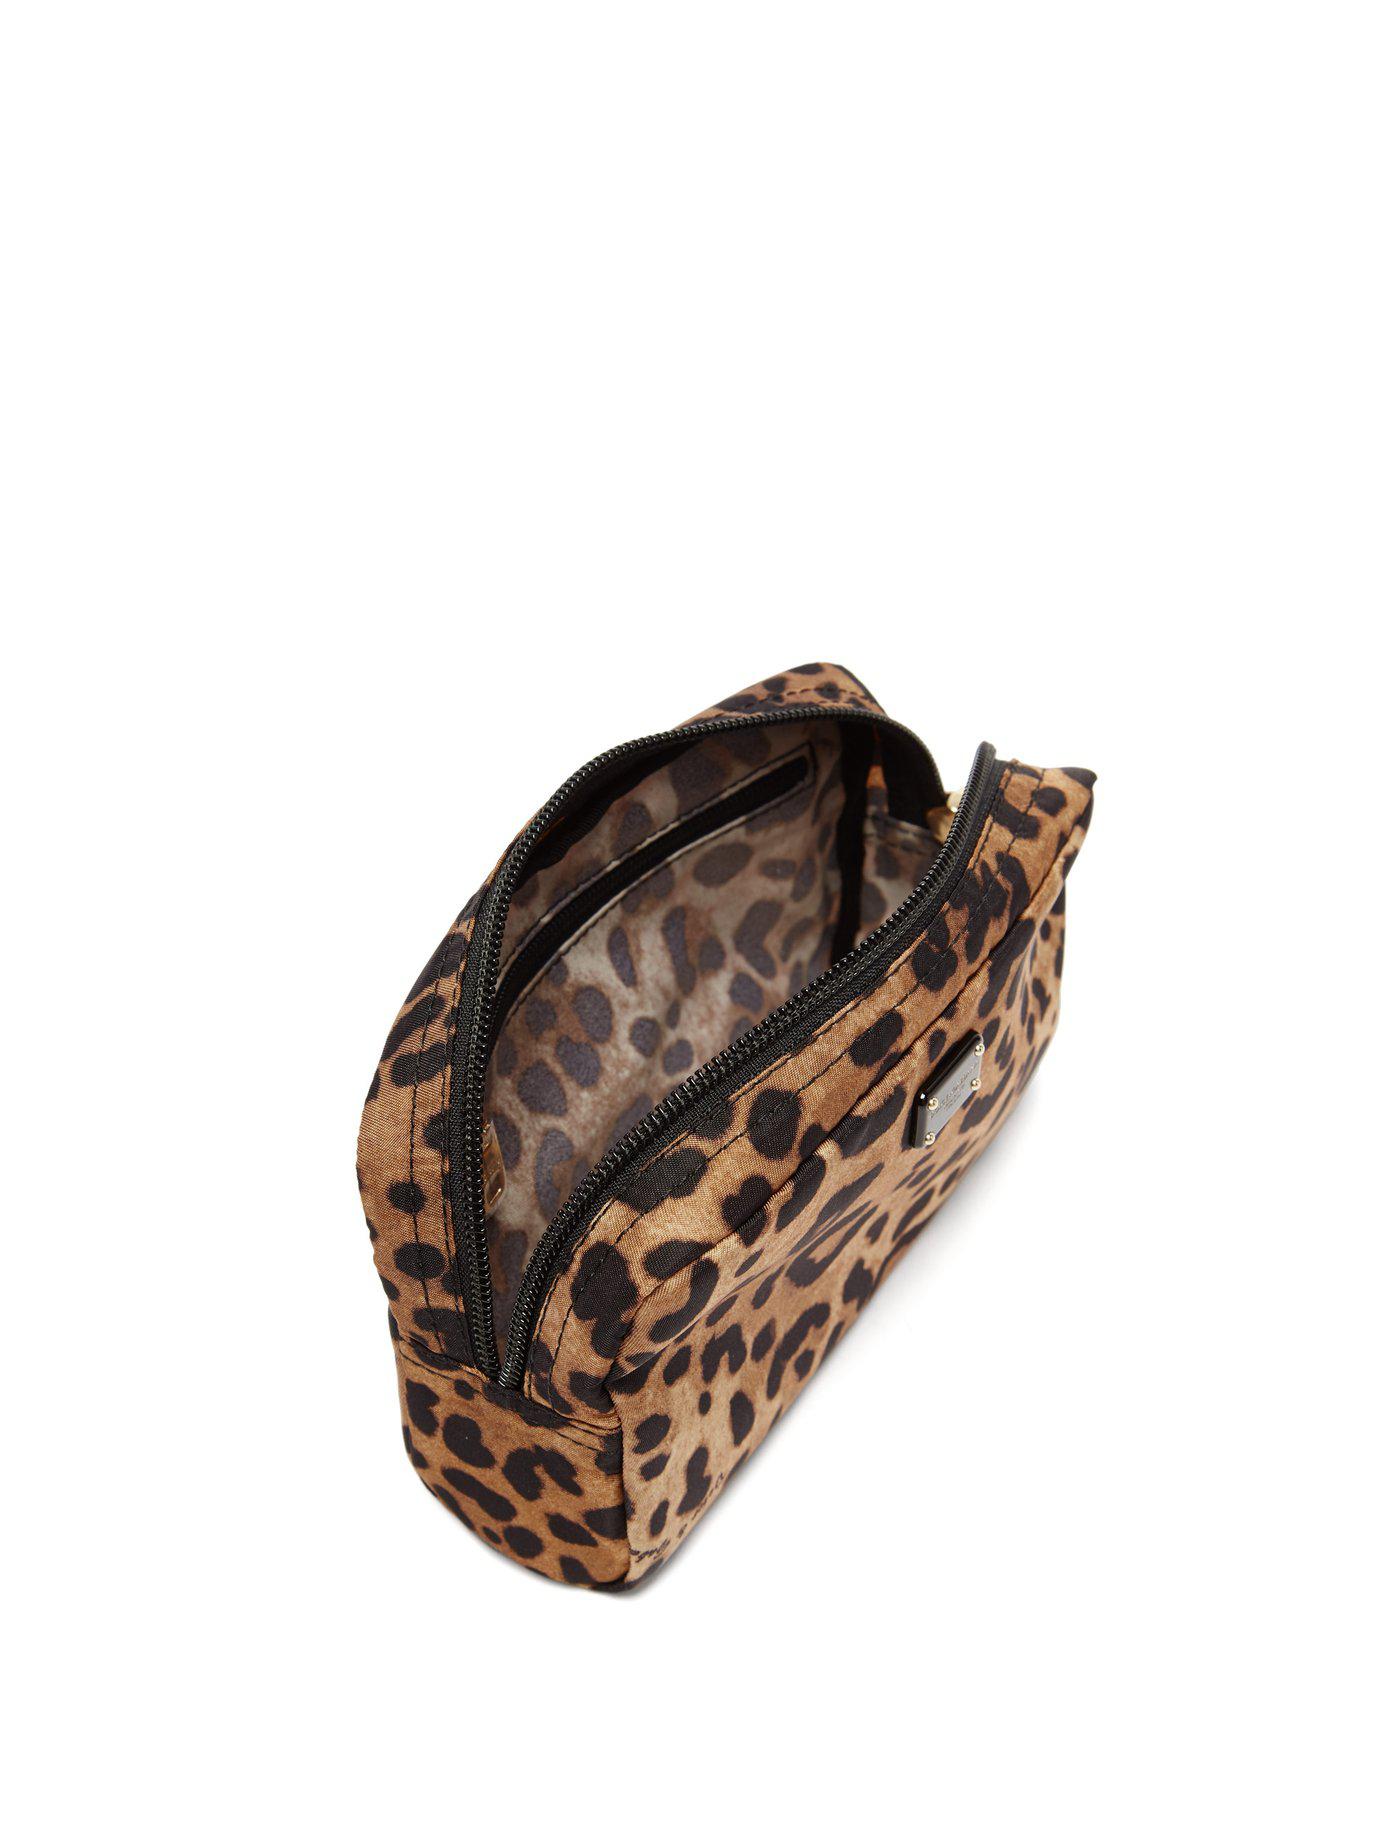 Dolce & Gabbana Synthetic Leopard Print Cosmetics Case in Brown - Lyst